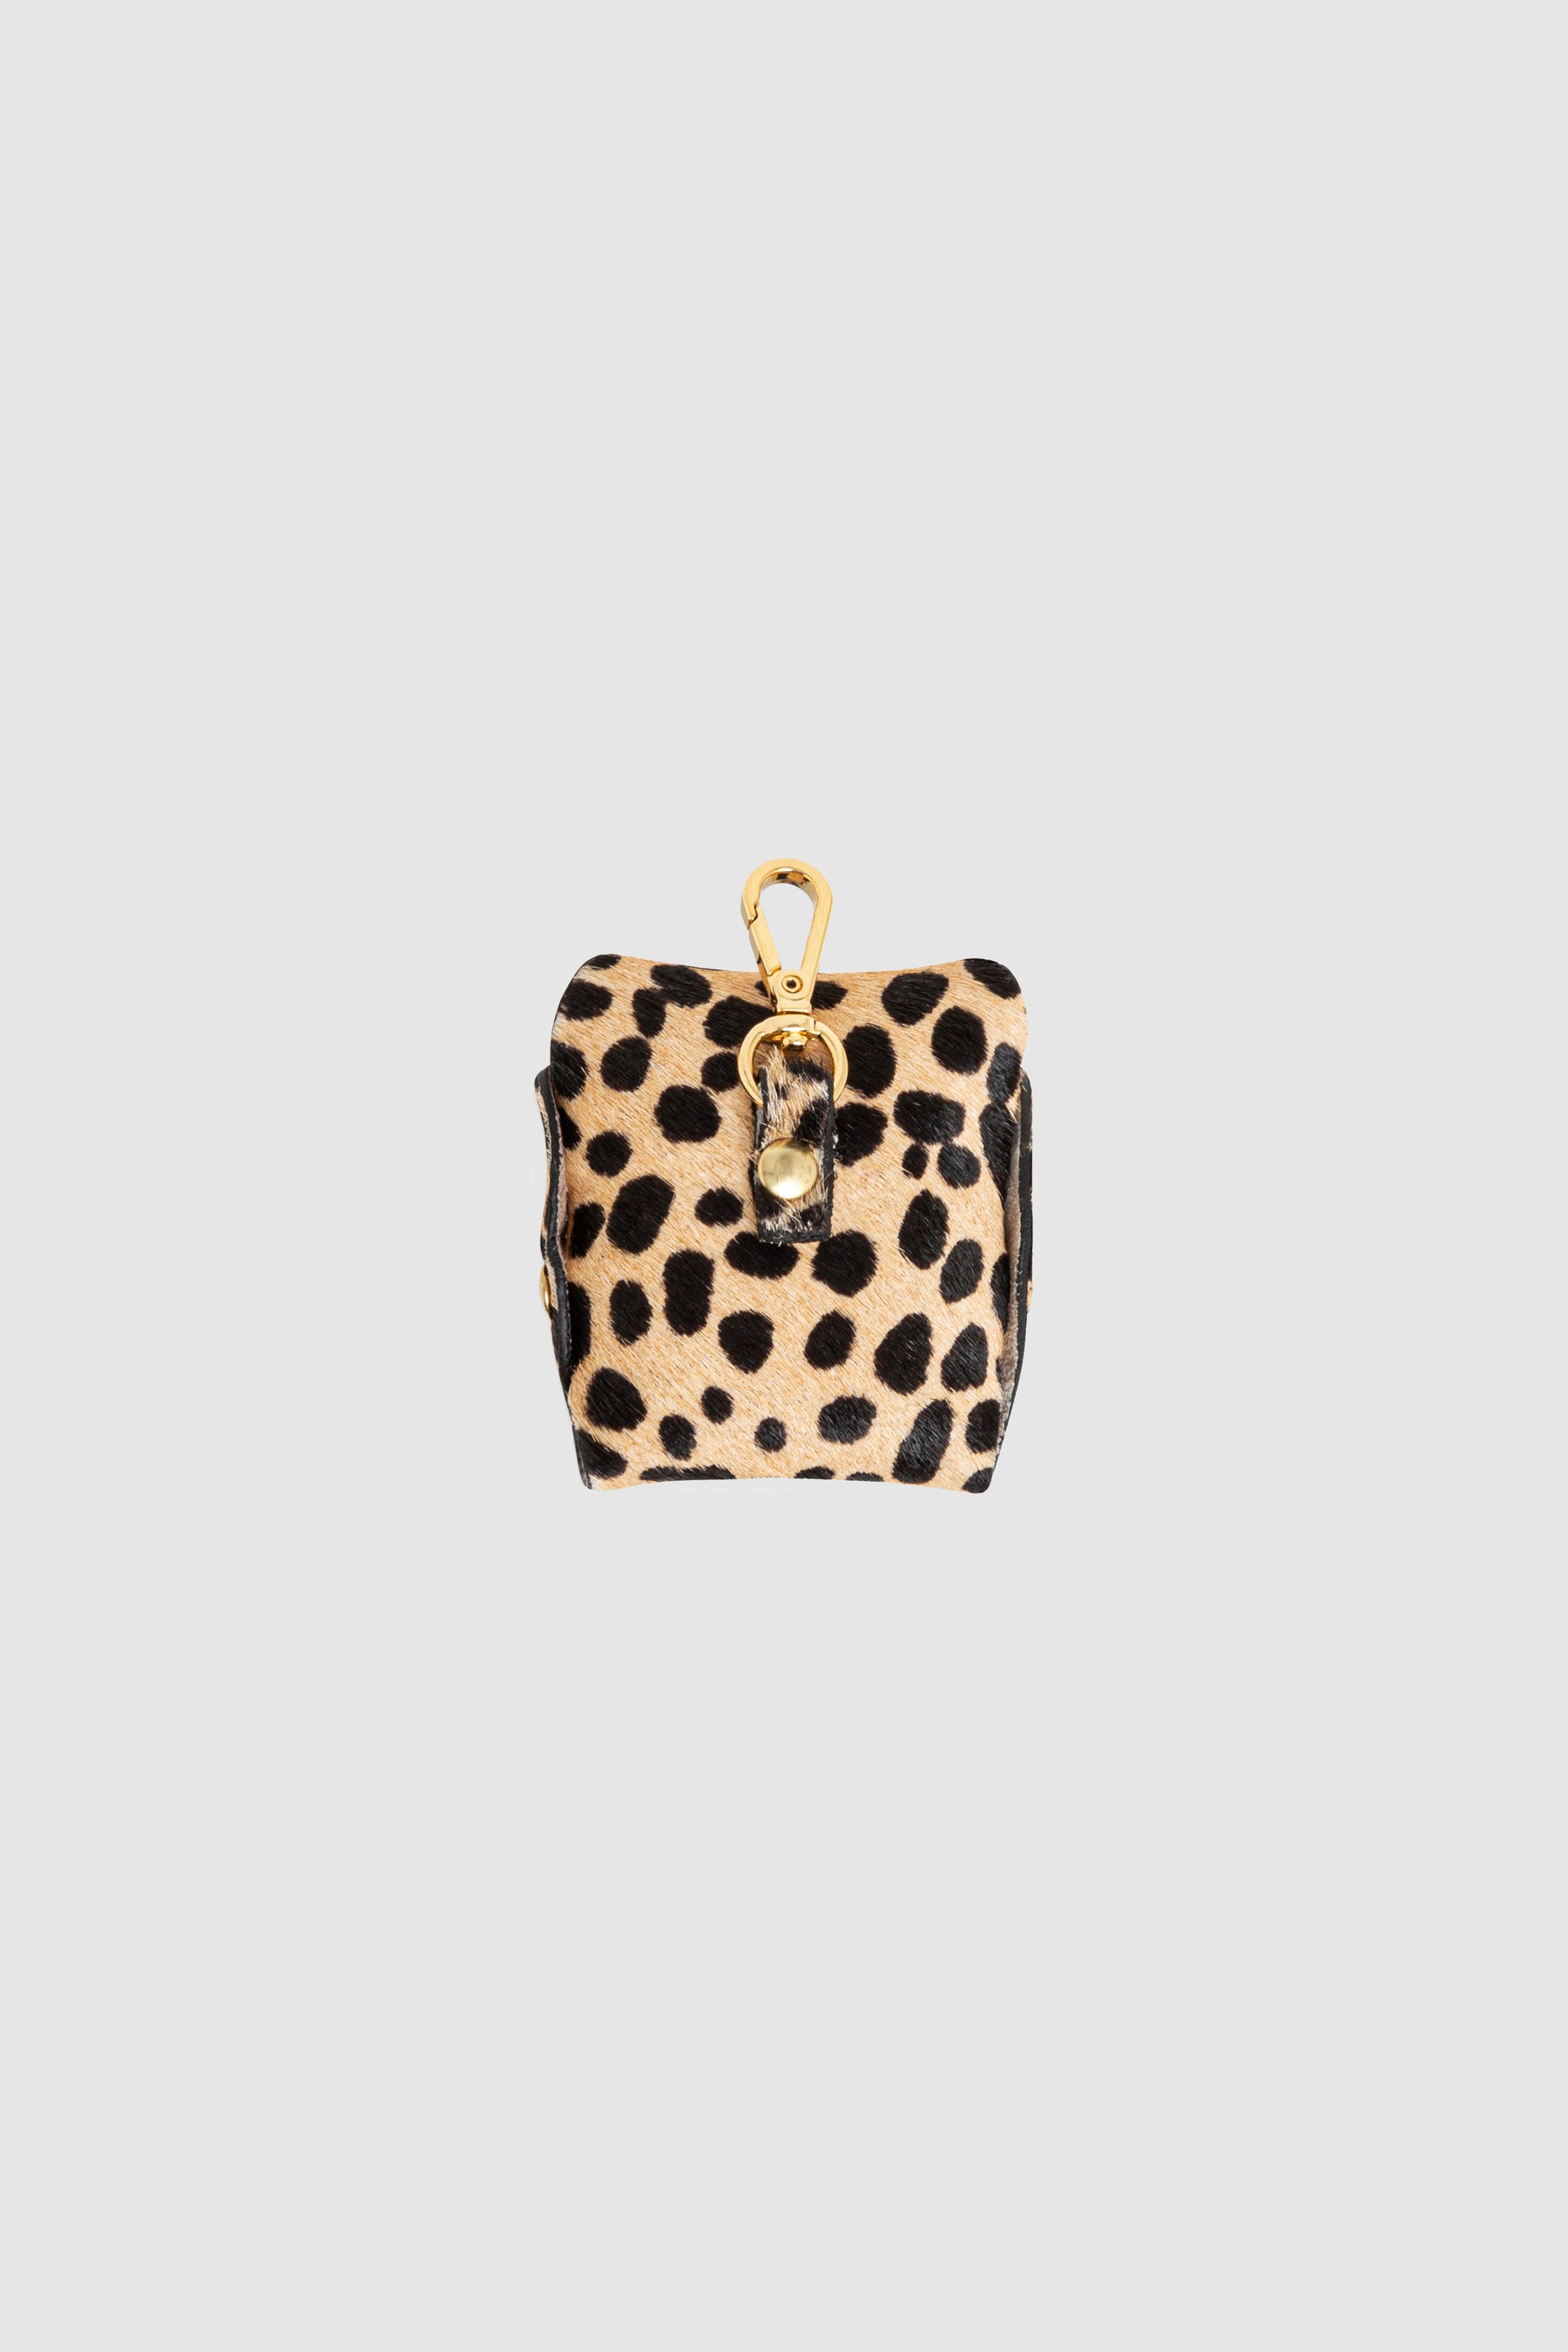 The Minis - Airpods case in Cheetah printed leather